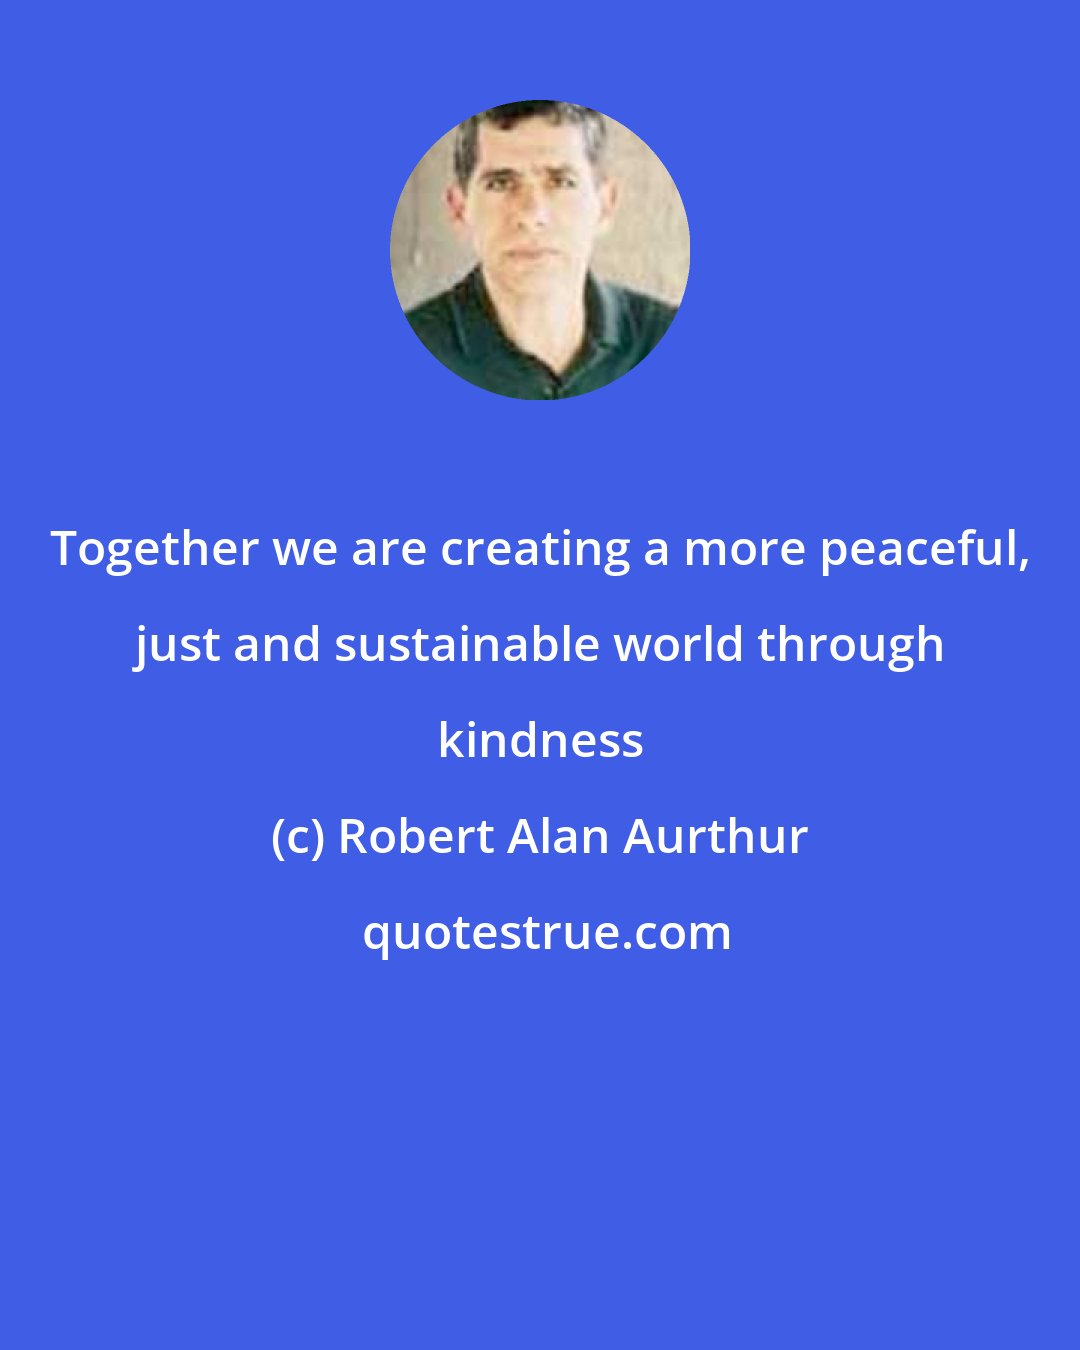 Robert Alan Aurthur: Together we are creating a more peaceful, just and sustainable world through kindness